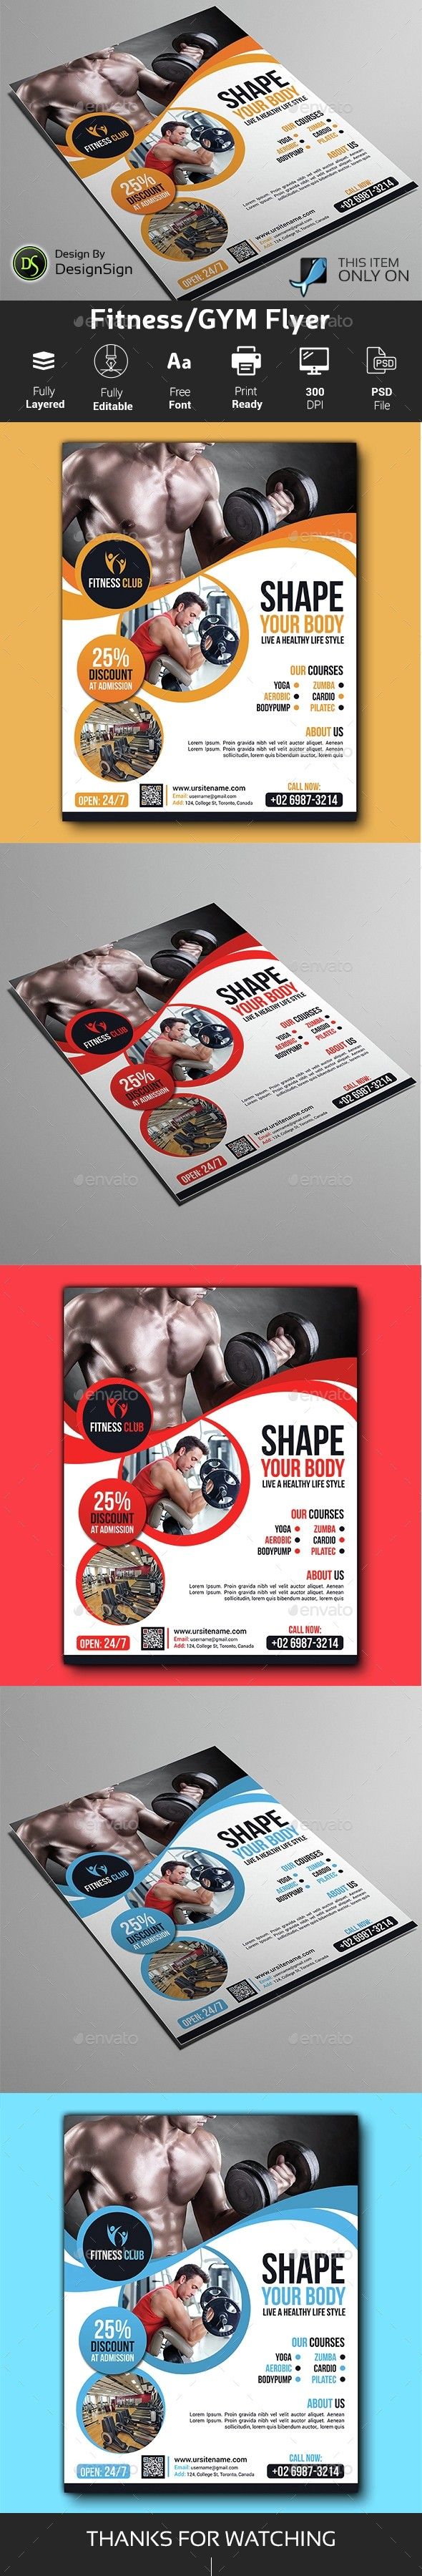 Healthcare-Advertising-advert-advertisement-advertising-boby-shpe-body-body-building-colorful-co Healthcare Advertising : advert, advertisement, advertising, boby shpe, body, body building, colorful, co...